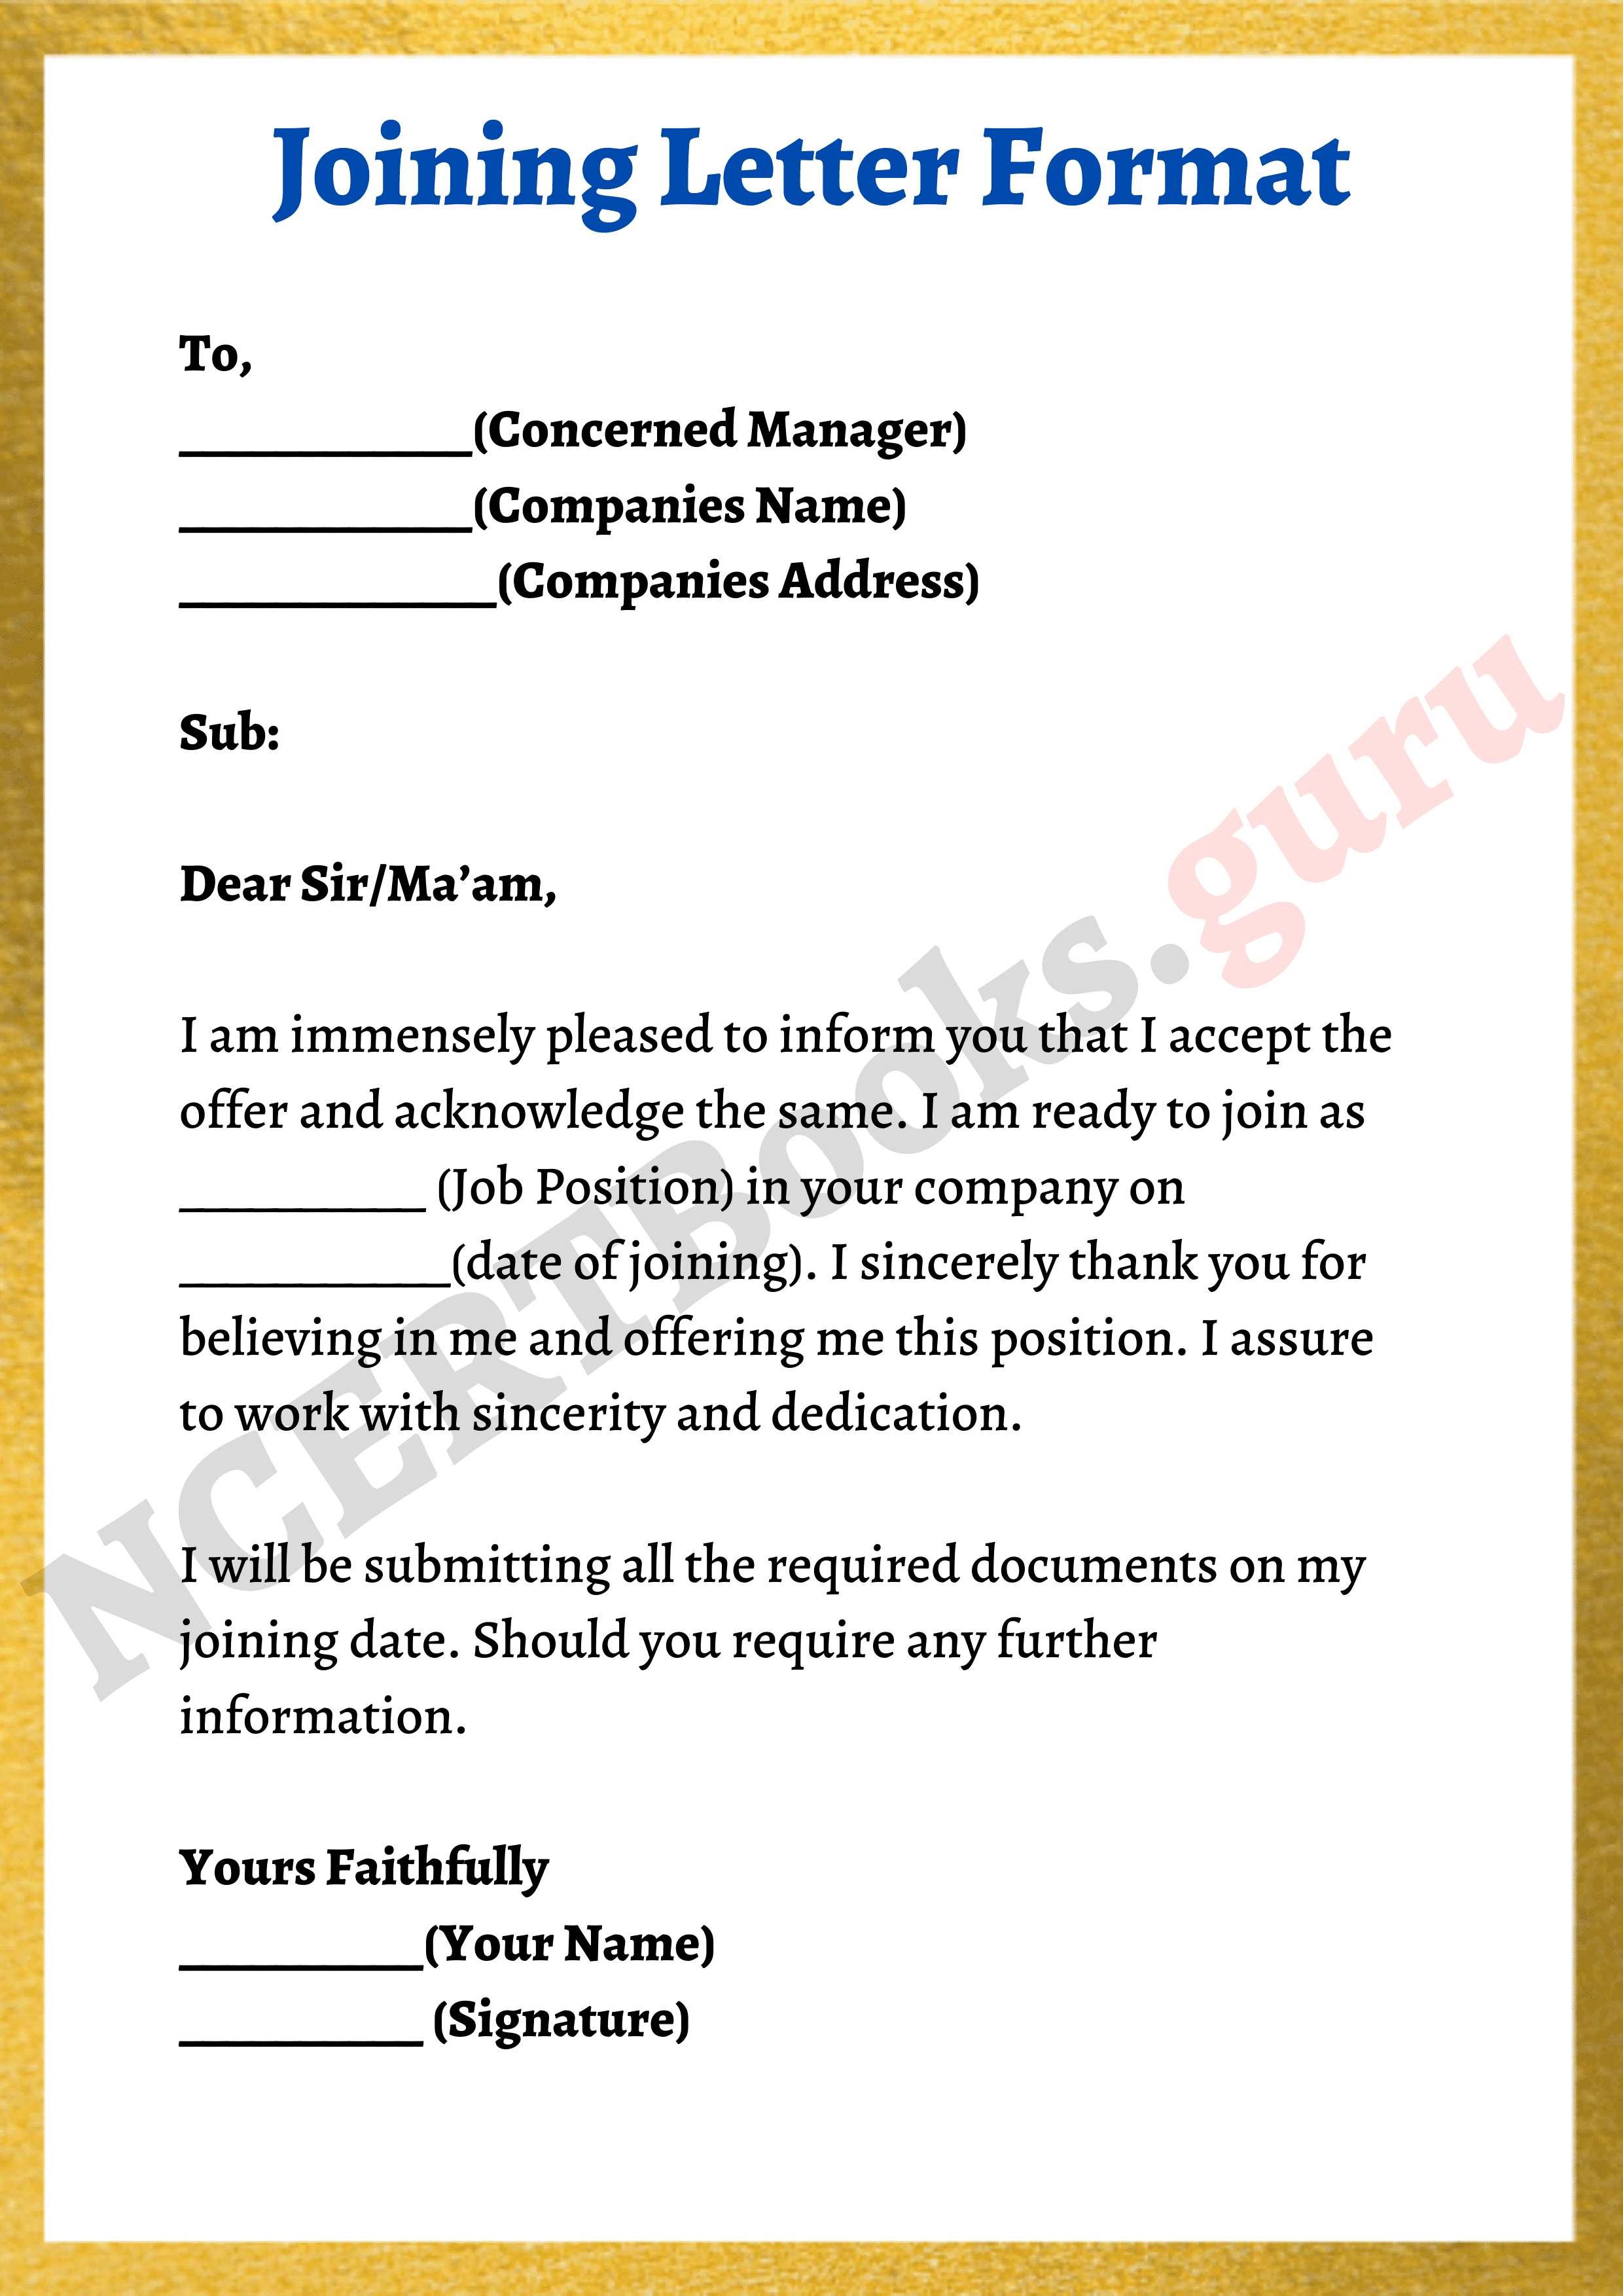 application letter to join a company